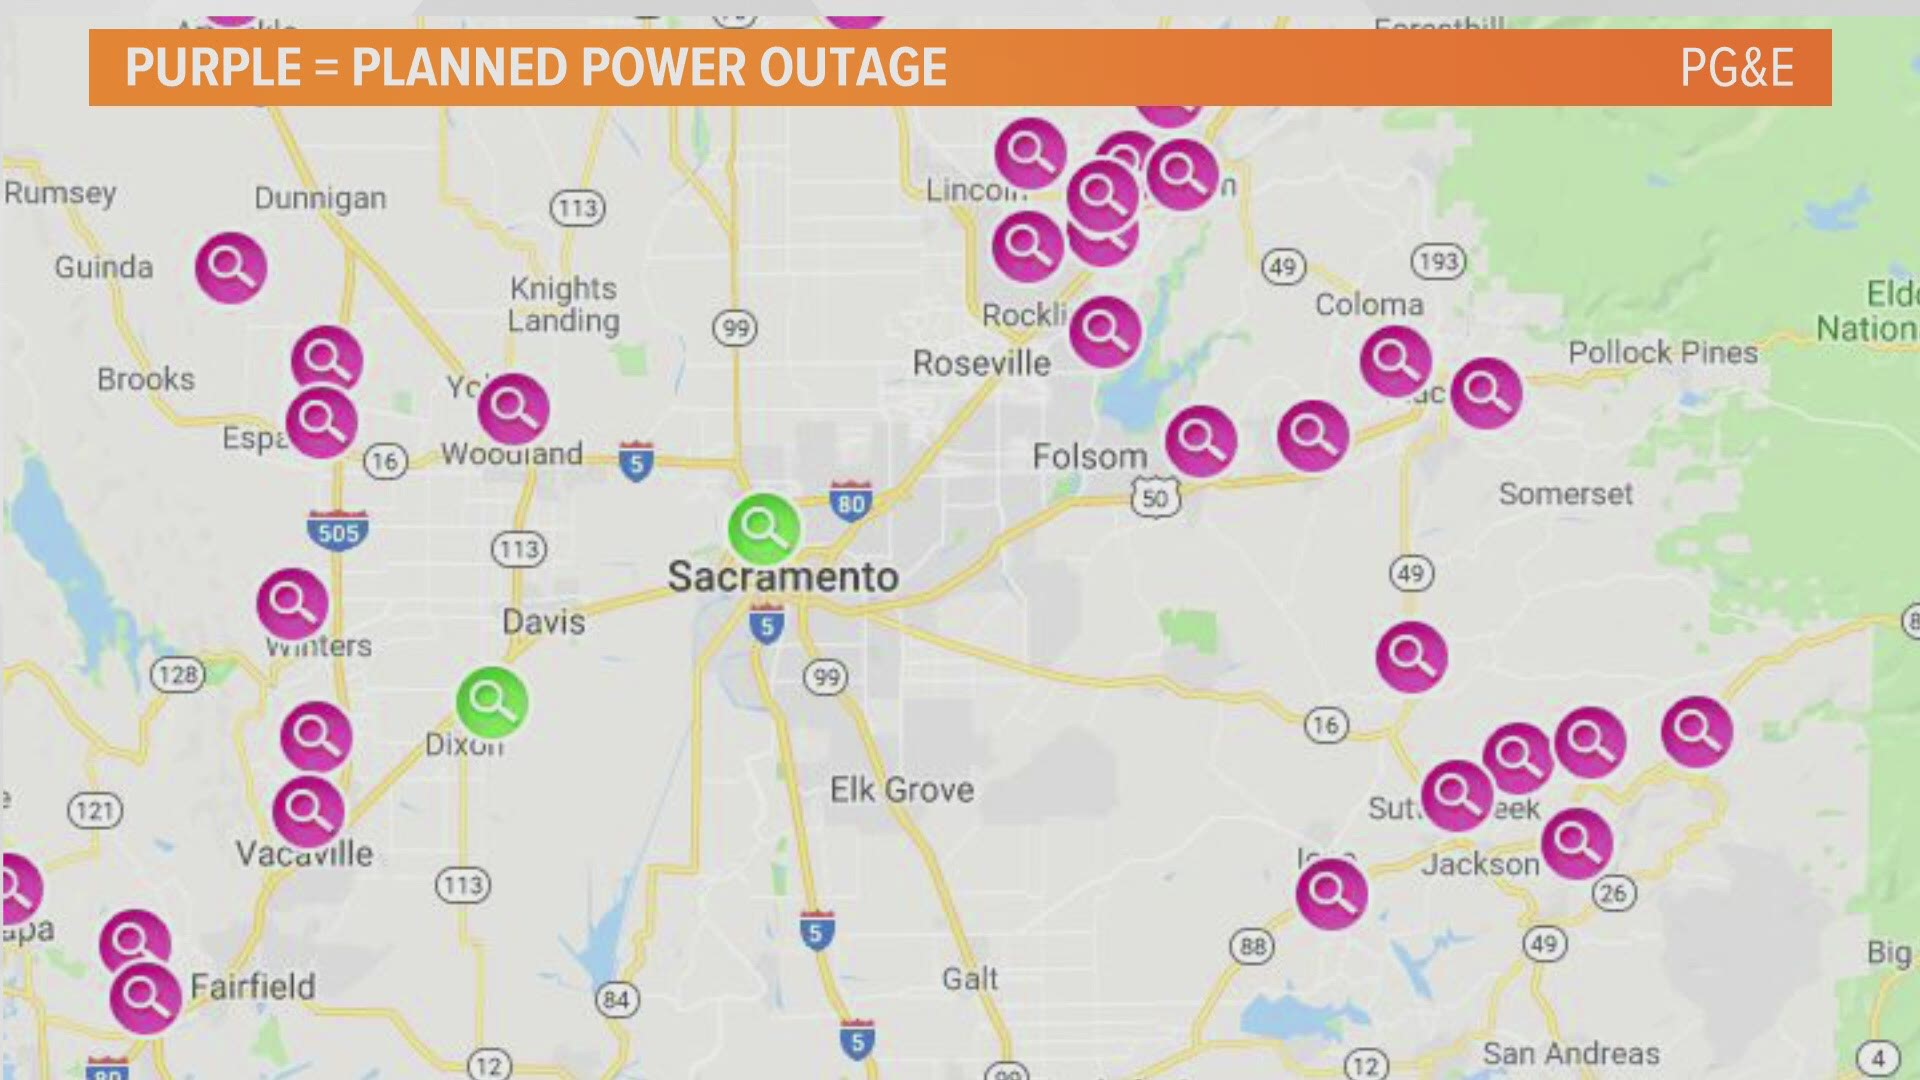 We spoke with SMUD the morning of Oct. 9 and the company said they are aware of and monitoring the windy conditions, but have no outages planned.